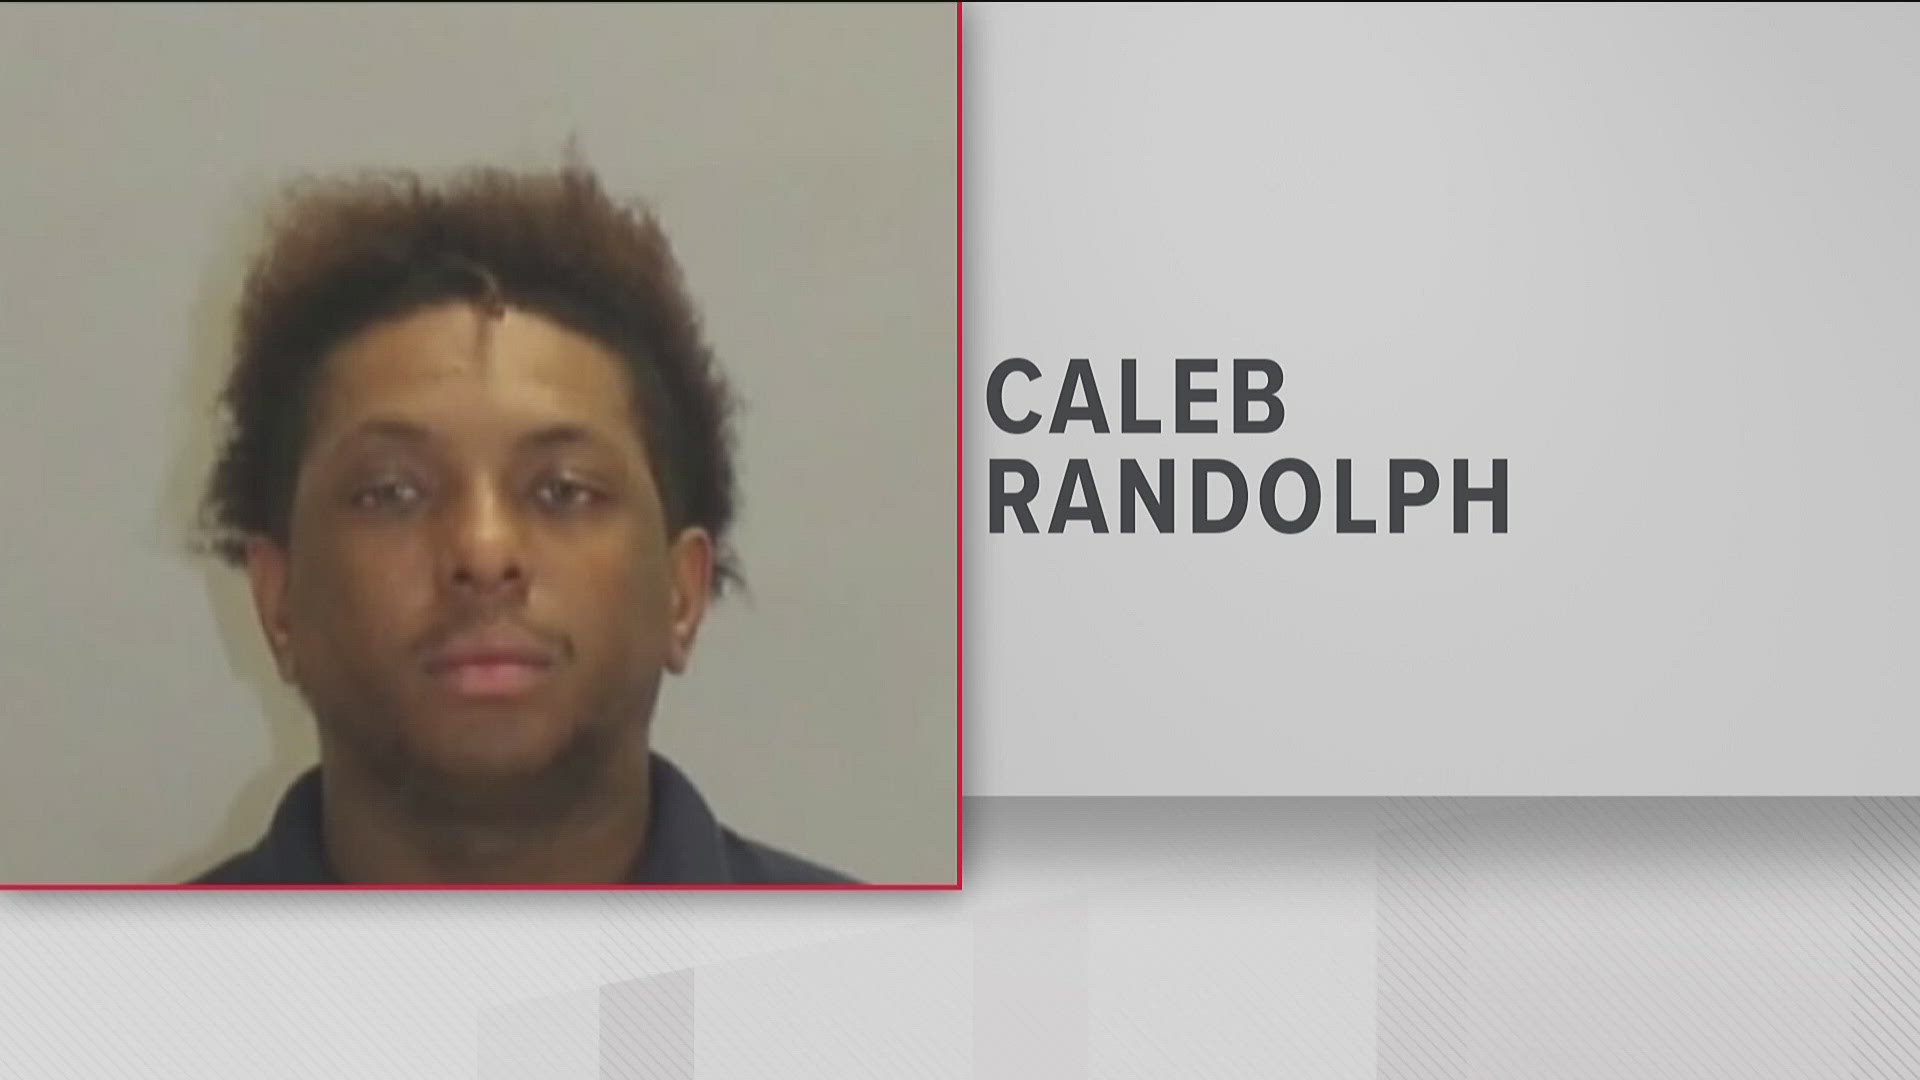 Prosecutors say 27-year-old Caleb Randolph had a relationship with a teen resident of the Rainbow House shelter while he was working there.